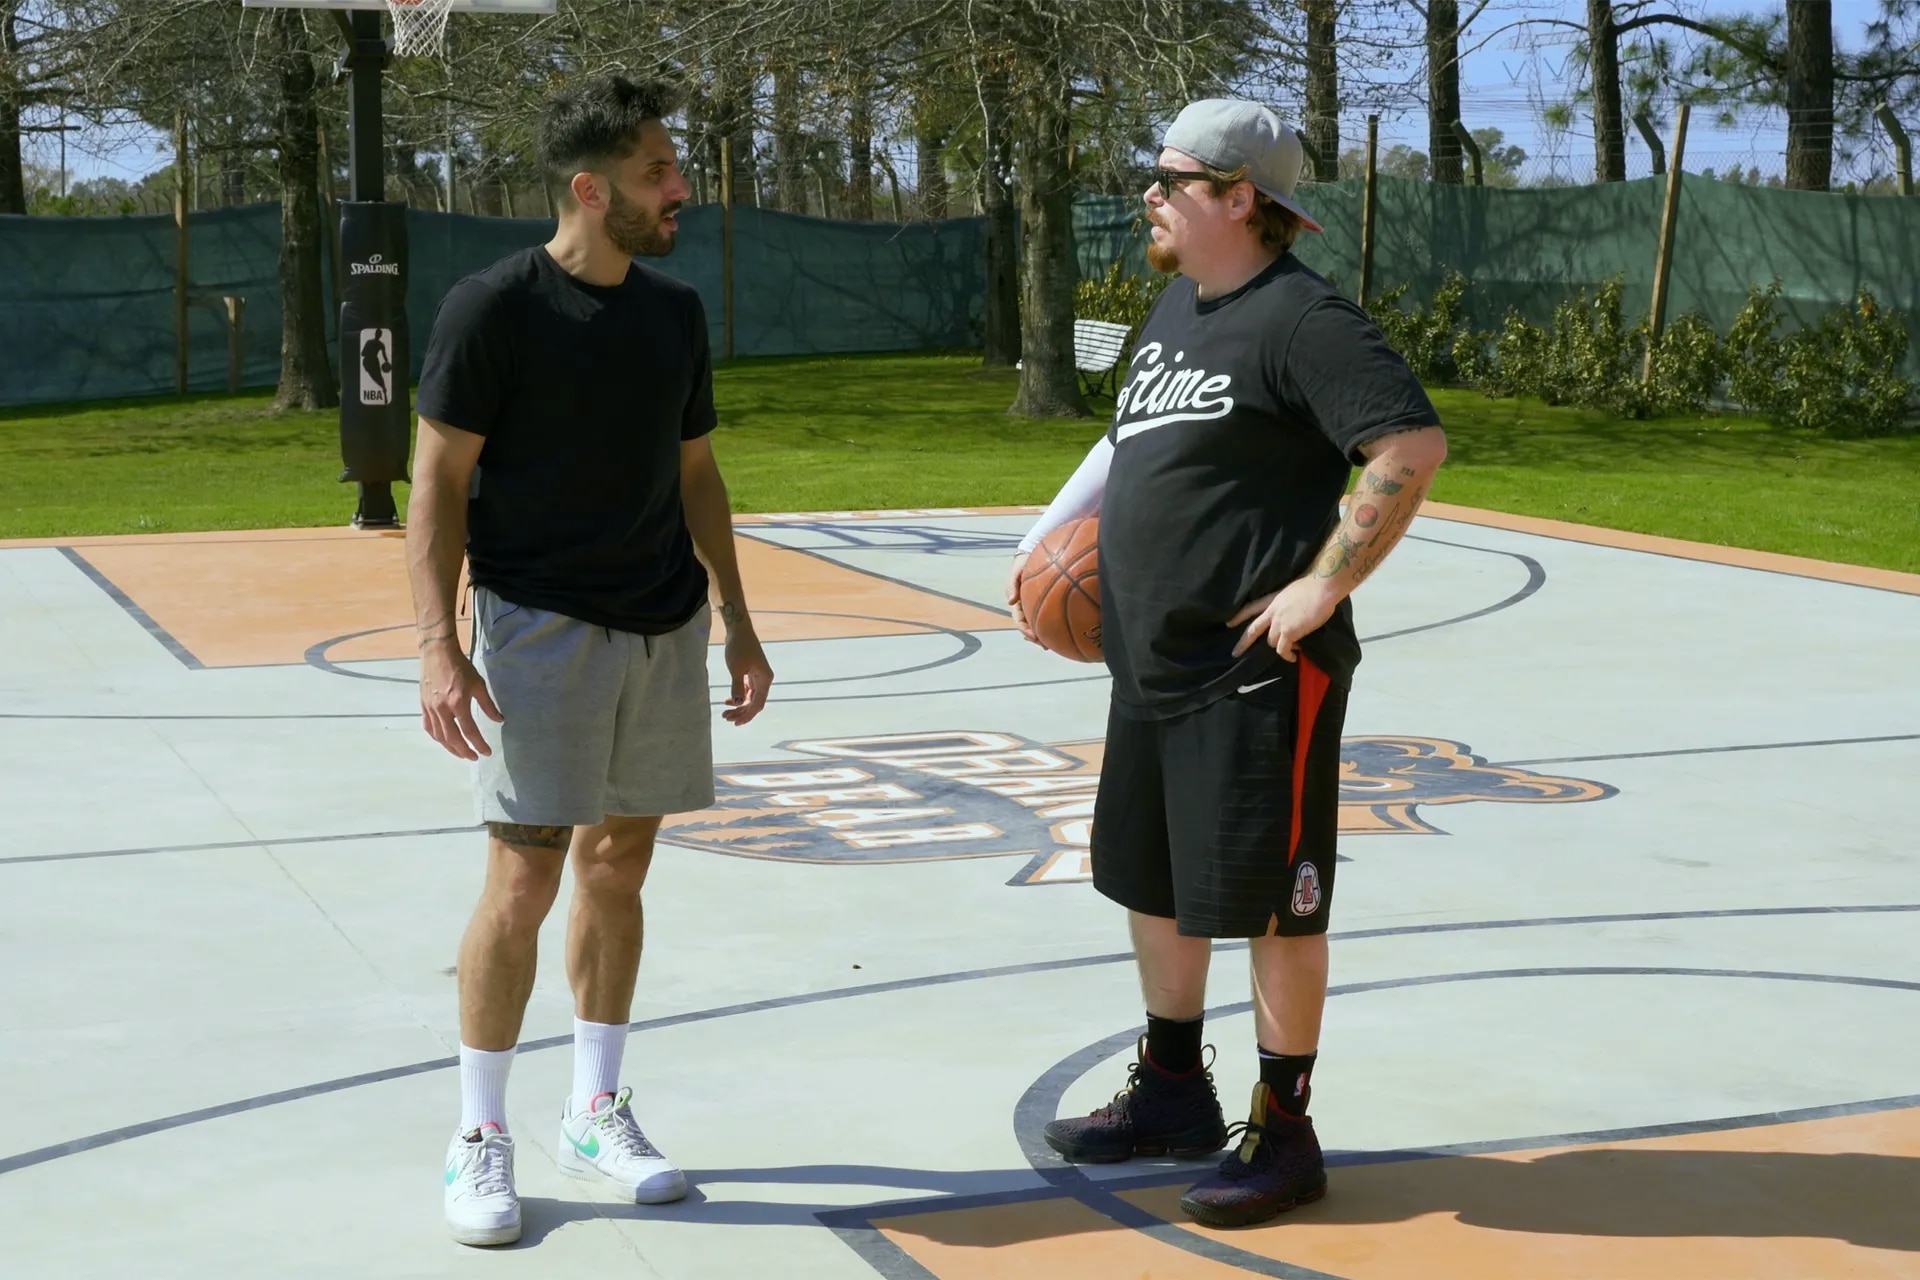 Basketball fanatic, Migue Granados premiered his own court with none other than Facundo Campazzo